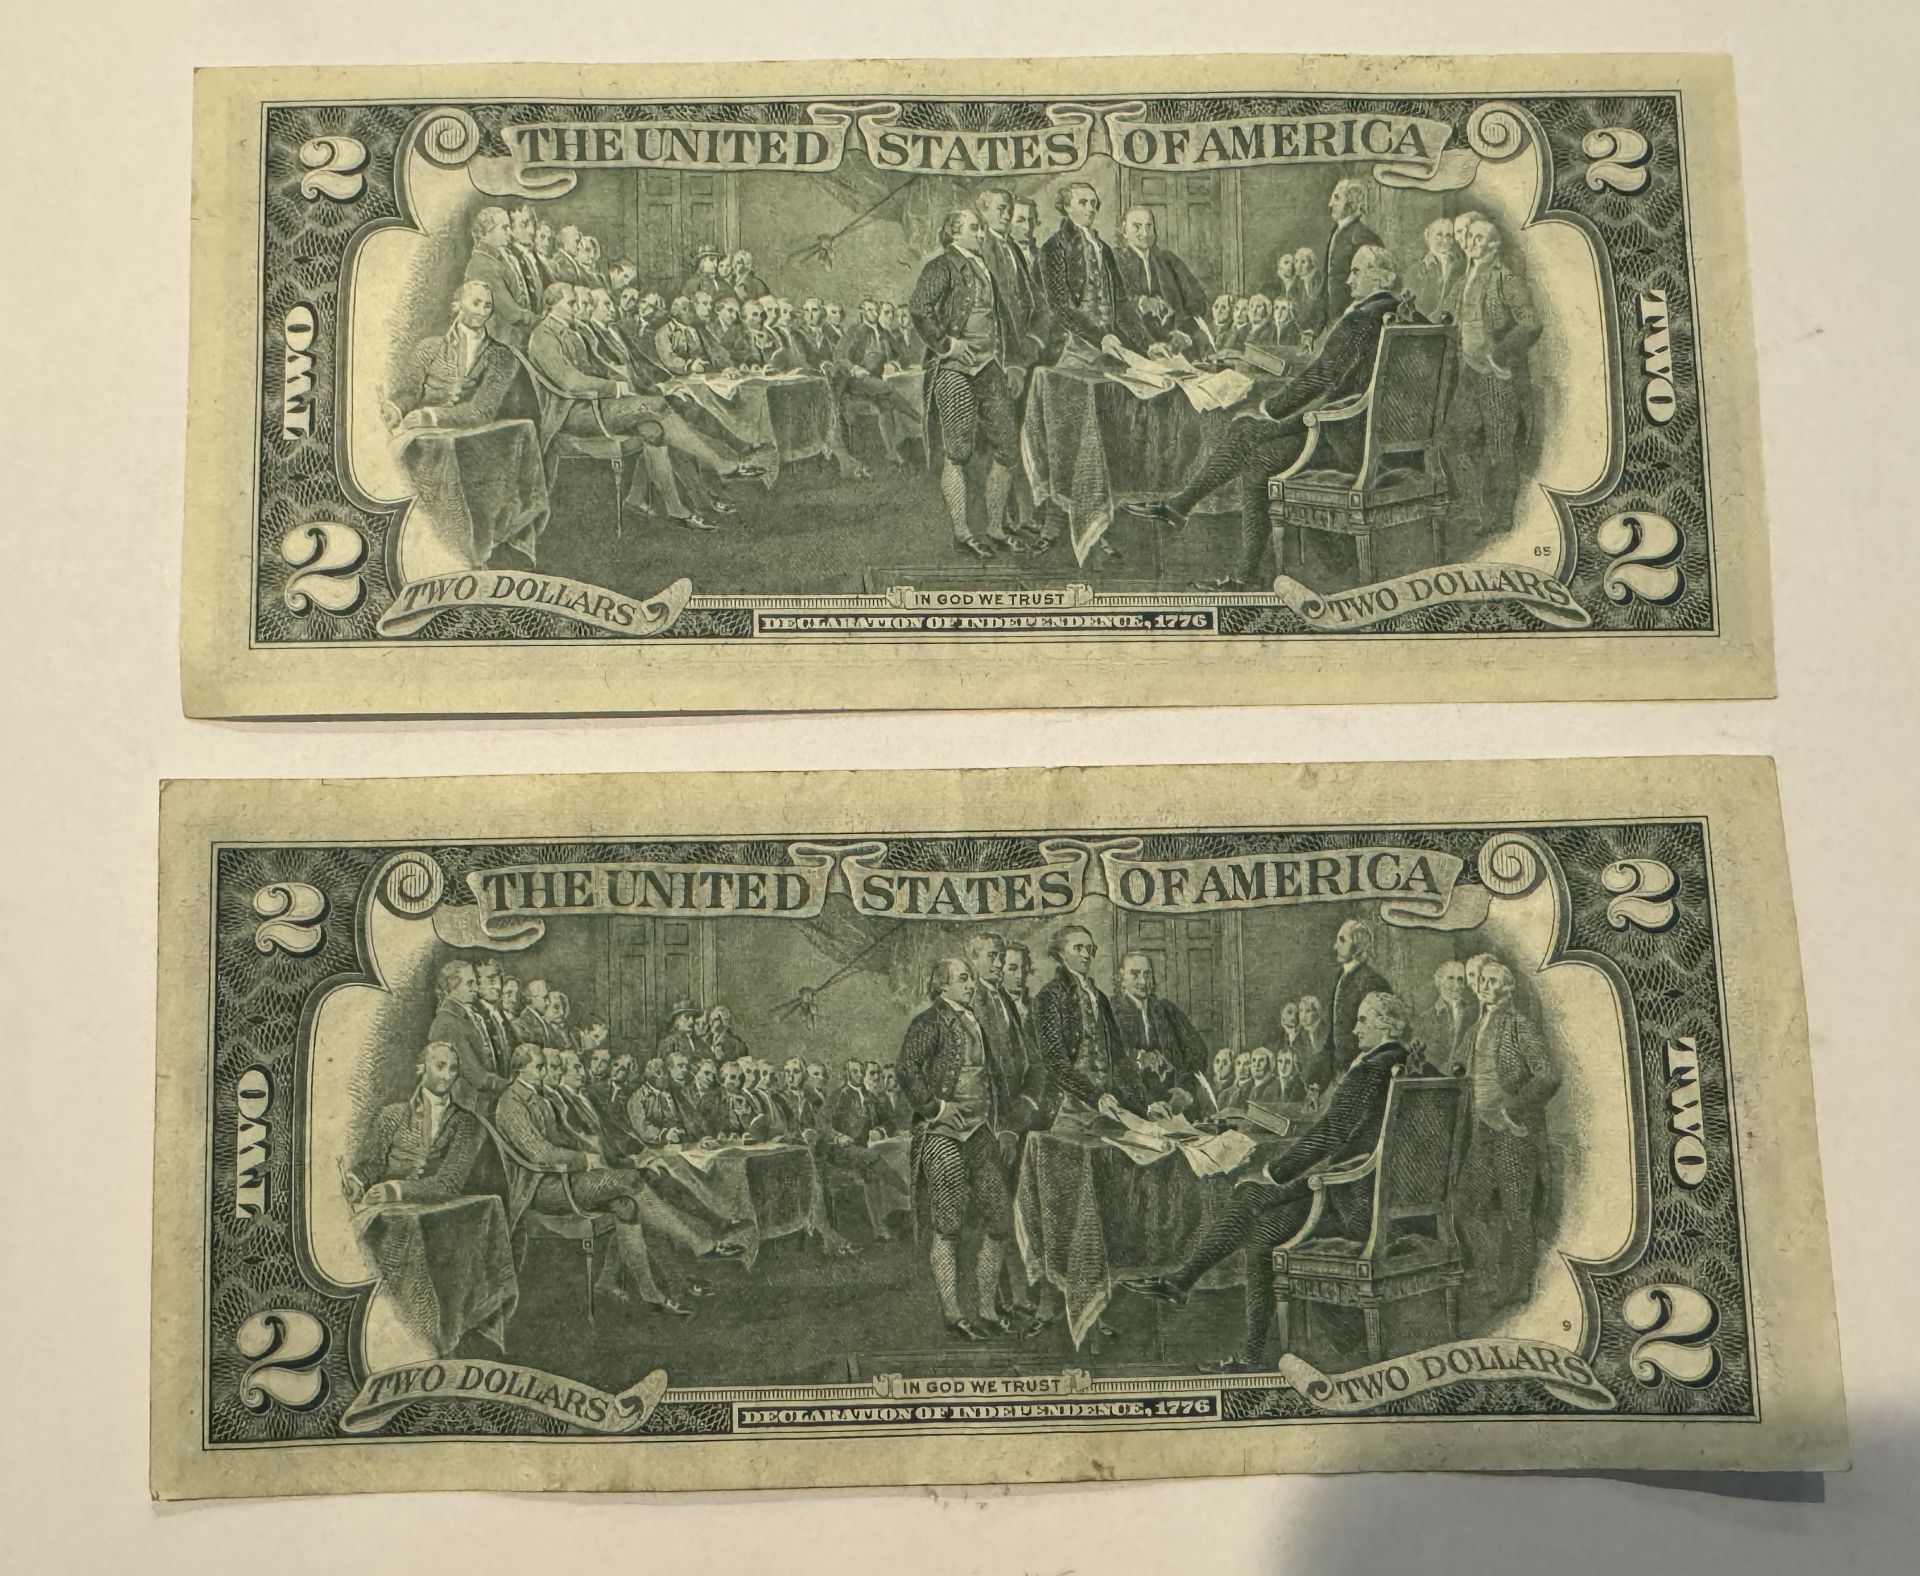 $2 UNITED STATES BILL RED SEAL - SERIES 1963 - Image 2 of 2